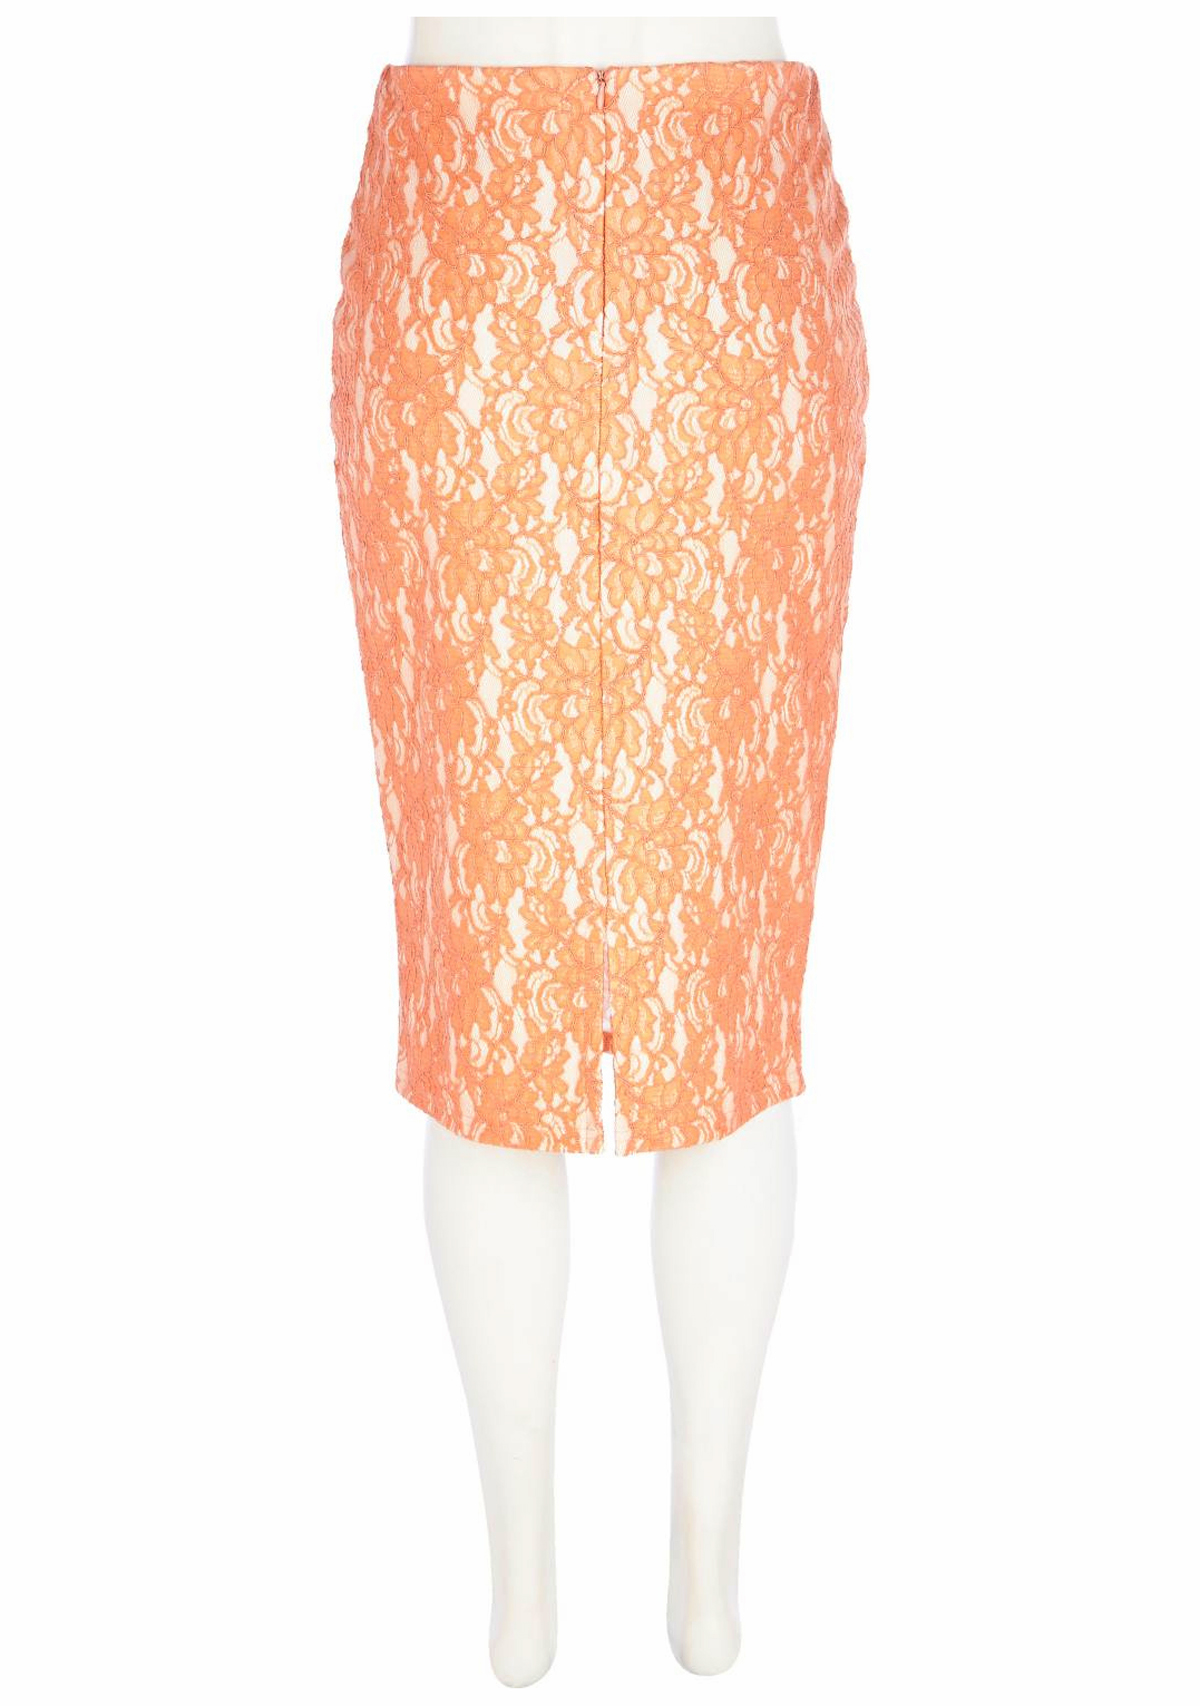 R1ver 1sland CORAL Lace Pencil Skirt - Size 6 to 16